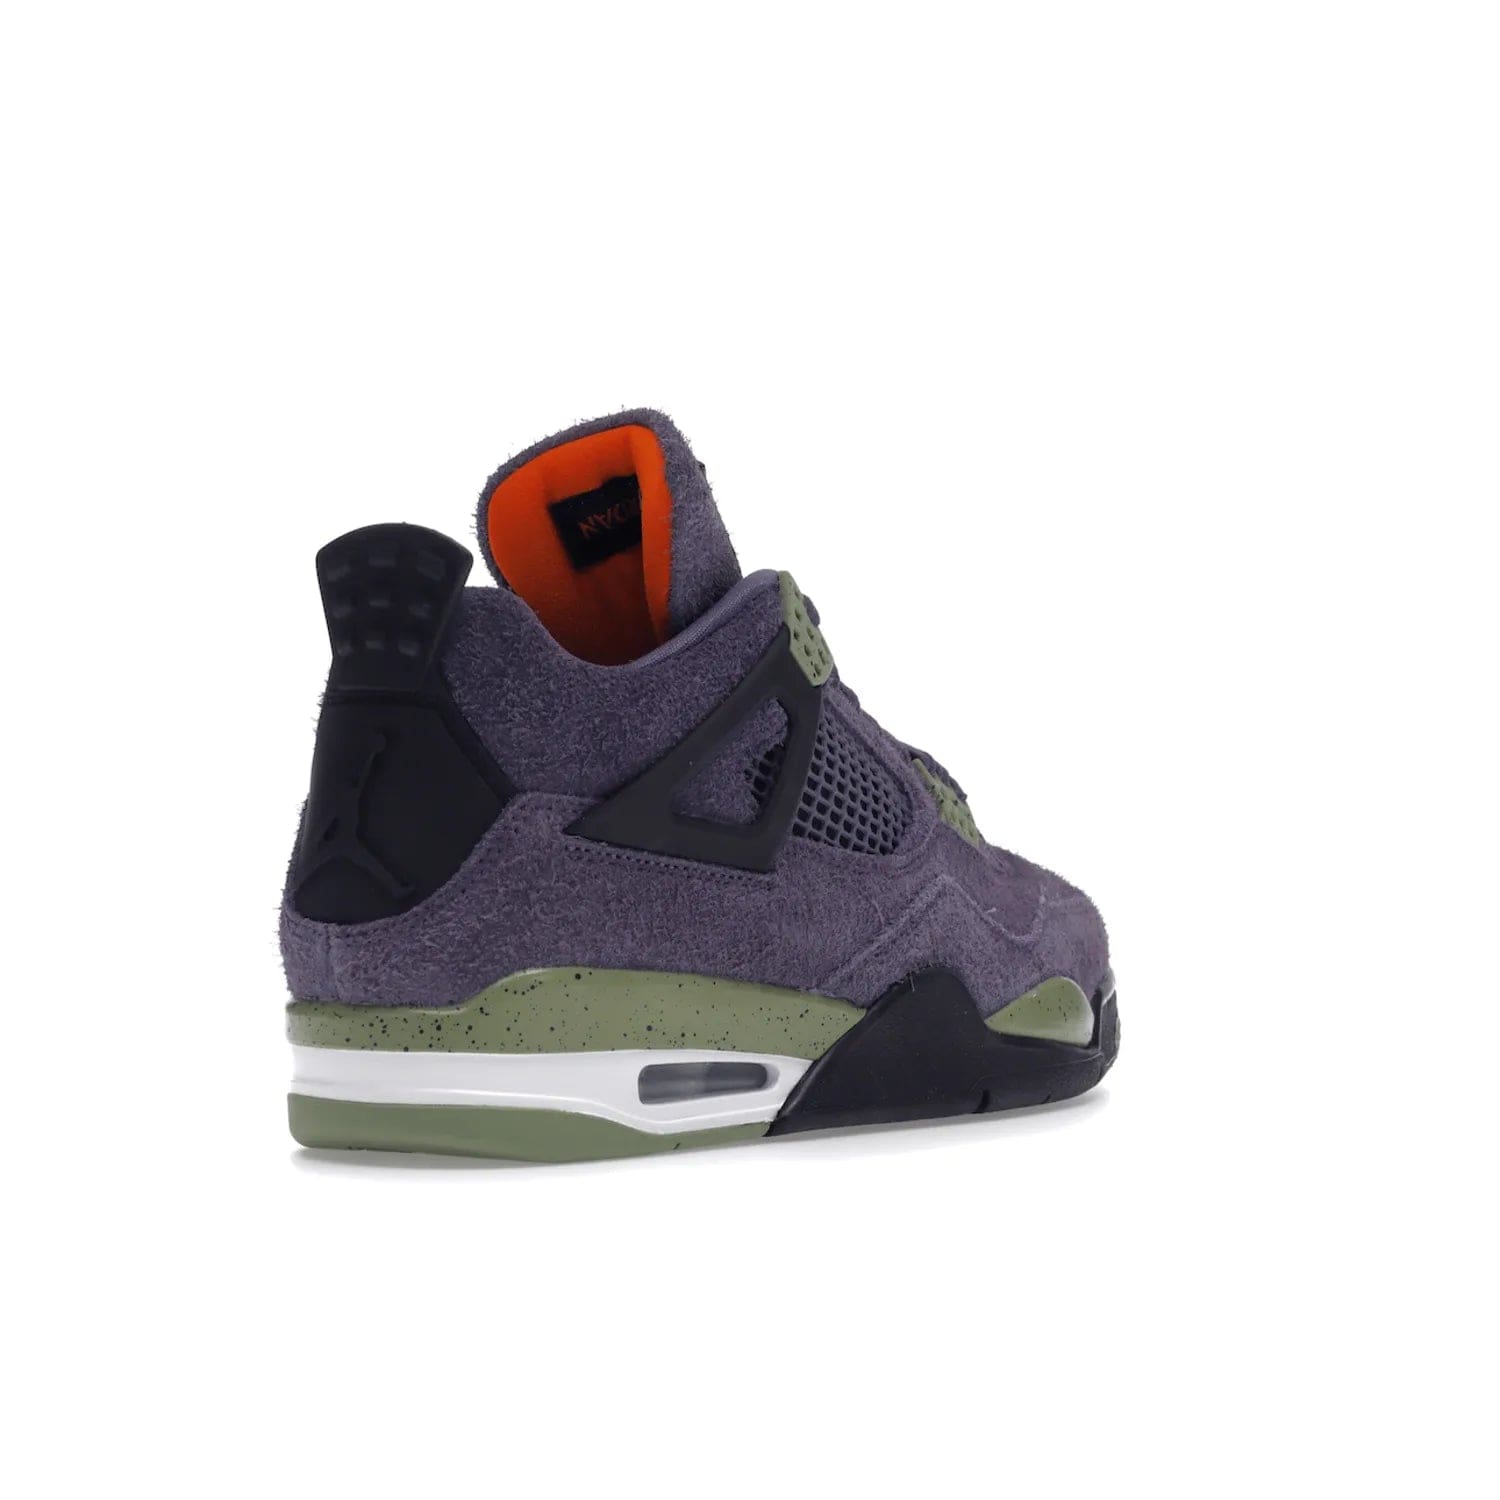 Jordan 4 Retro Canyon Purple (Women's) - Image 32 - Only at www.BallersClubKickz.com - New Air Jordan 4 Retro Canyon Purple W sneaker features shaggy purple suede, lime highlights & safety orange Jumpman branding. Classic ankle-hugging silhouette with modern colors released 15/10/2022.